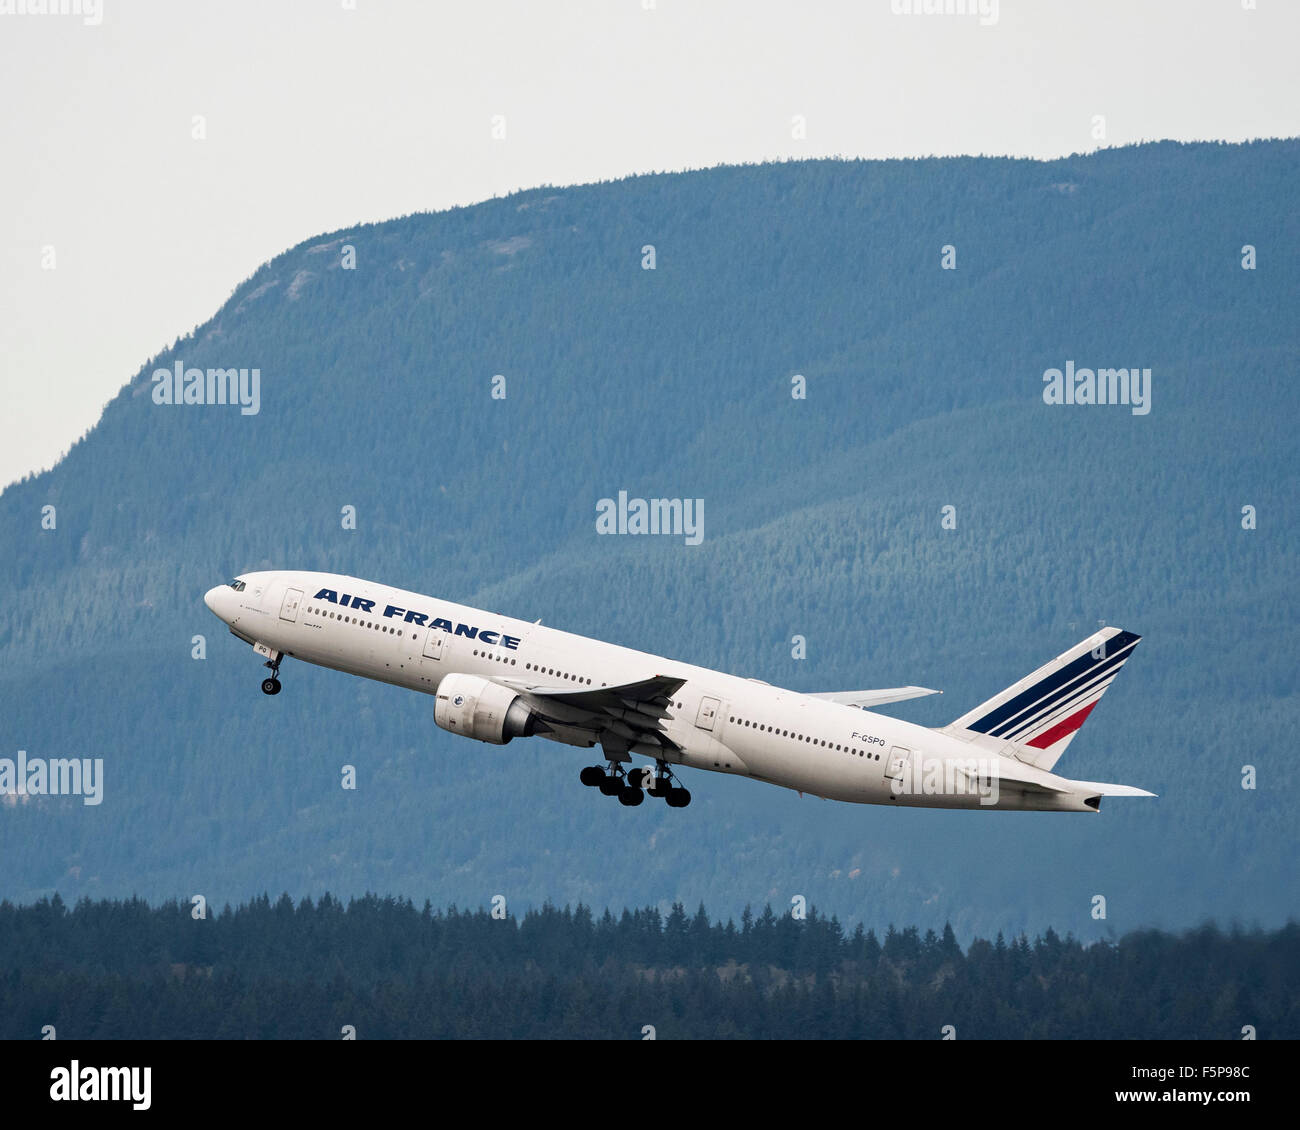 Air France Boeing 777 takes off from Vancouver International Airport. Stock Photo